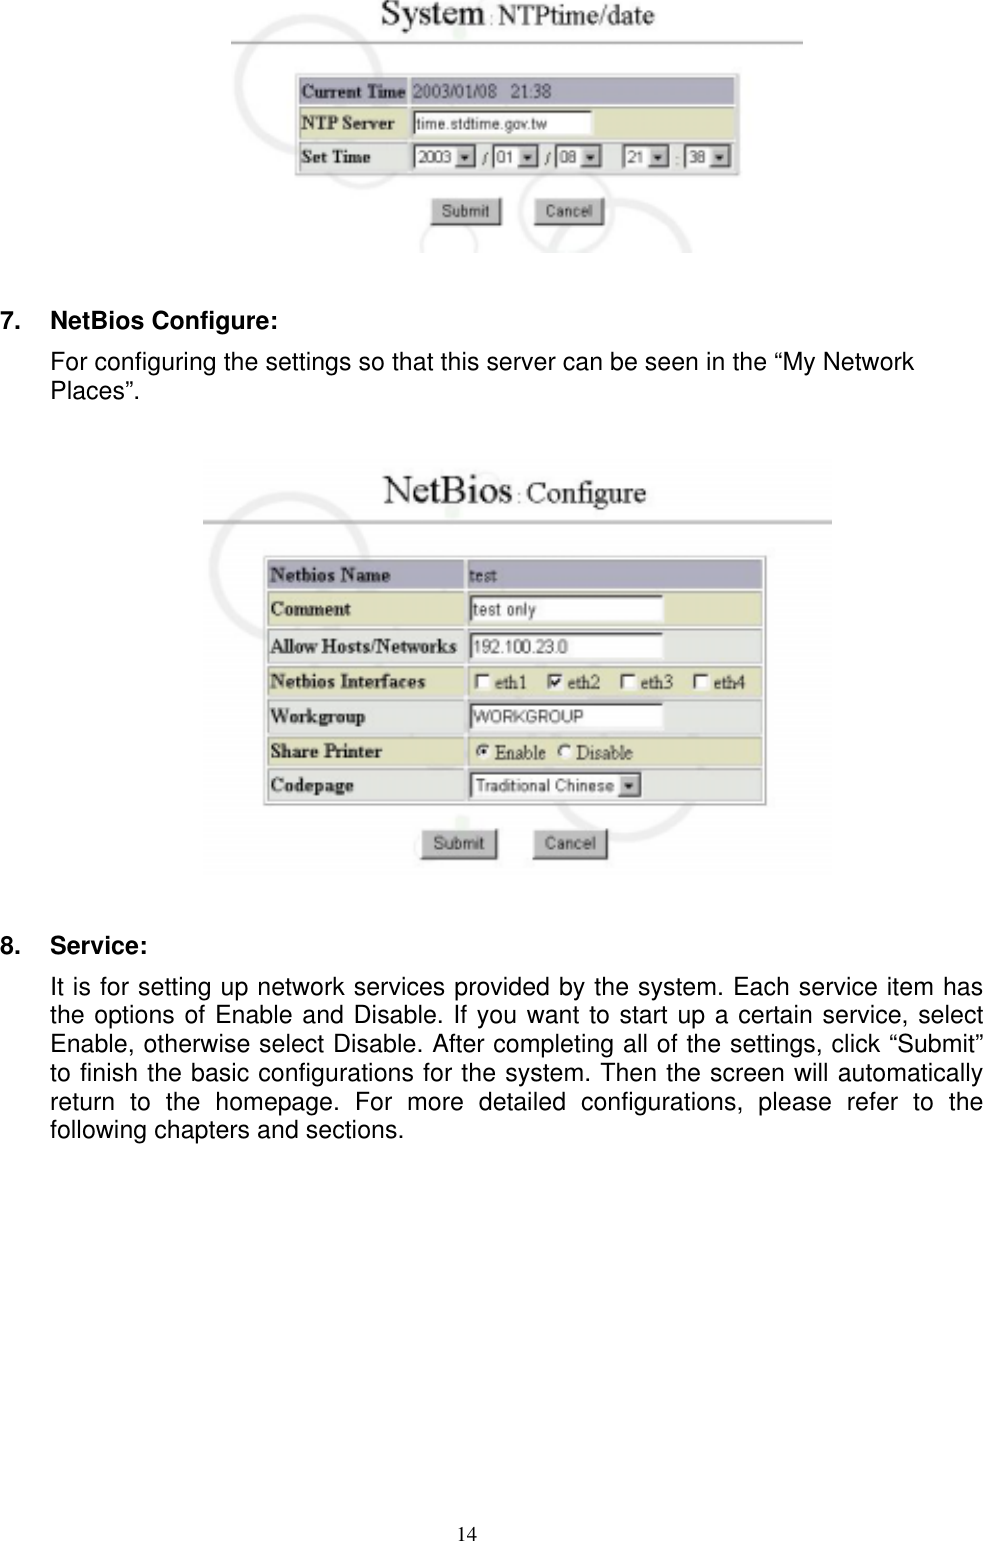  14  7.  NetBios Configure: For configuring the settings so that this server can be seen in the “My Network Places”.    8.  Service: It is for setting up network services provided by the system. Each service item has the options of Enable and Disable. If you want to start up a certain service, select Enable, otherwise select Disable. After completing all of the settings, click “Submit” to finish the basic configurations for the system. Then the screen will automatically return to the homepage. For more detailed configurations, please refer to the following chapters and sections.    